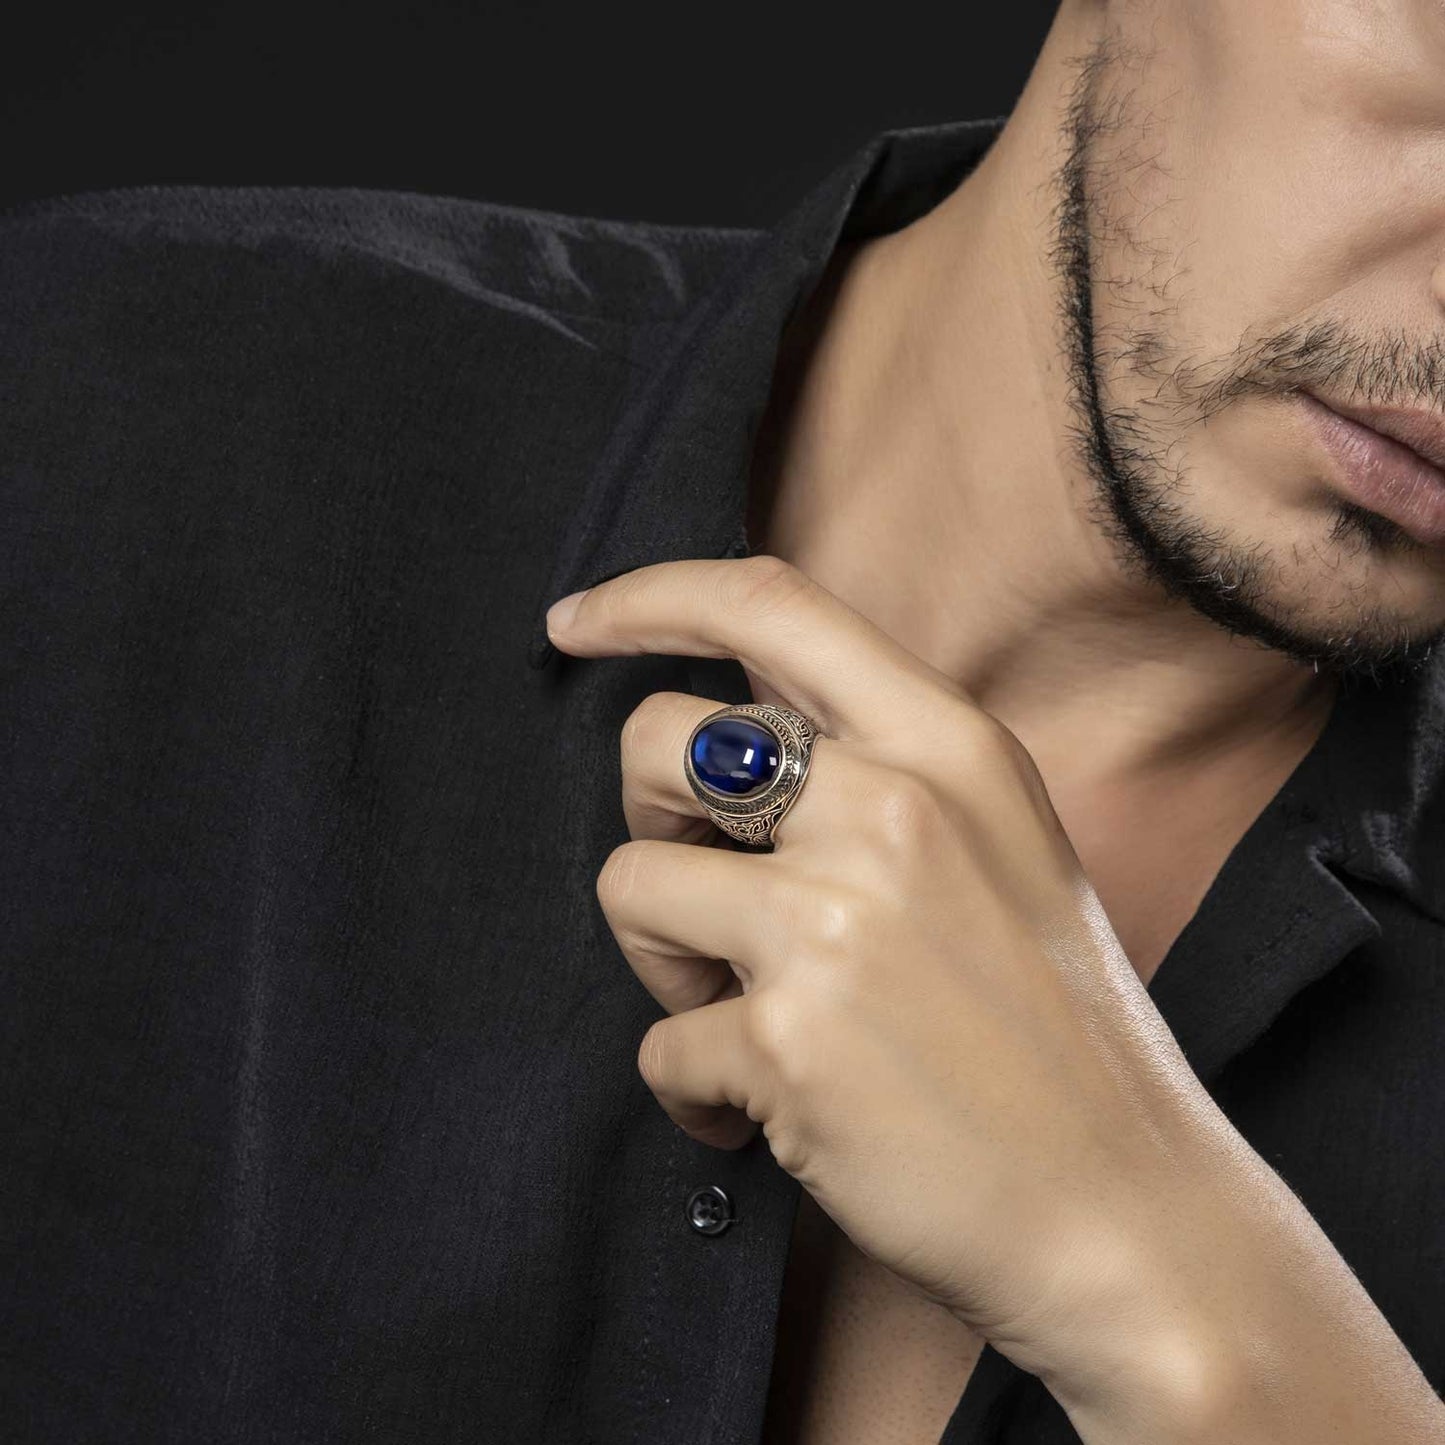 RARE PRINCE by CARAT SUTRA | Unique Turkish Style Ring with Blue S Sapphire | 925 Sterling Silver Oxidized Ring | Men's Jewelry | With Certificate of Authenticity and 925 Hallmark - caratsutra